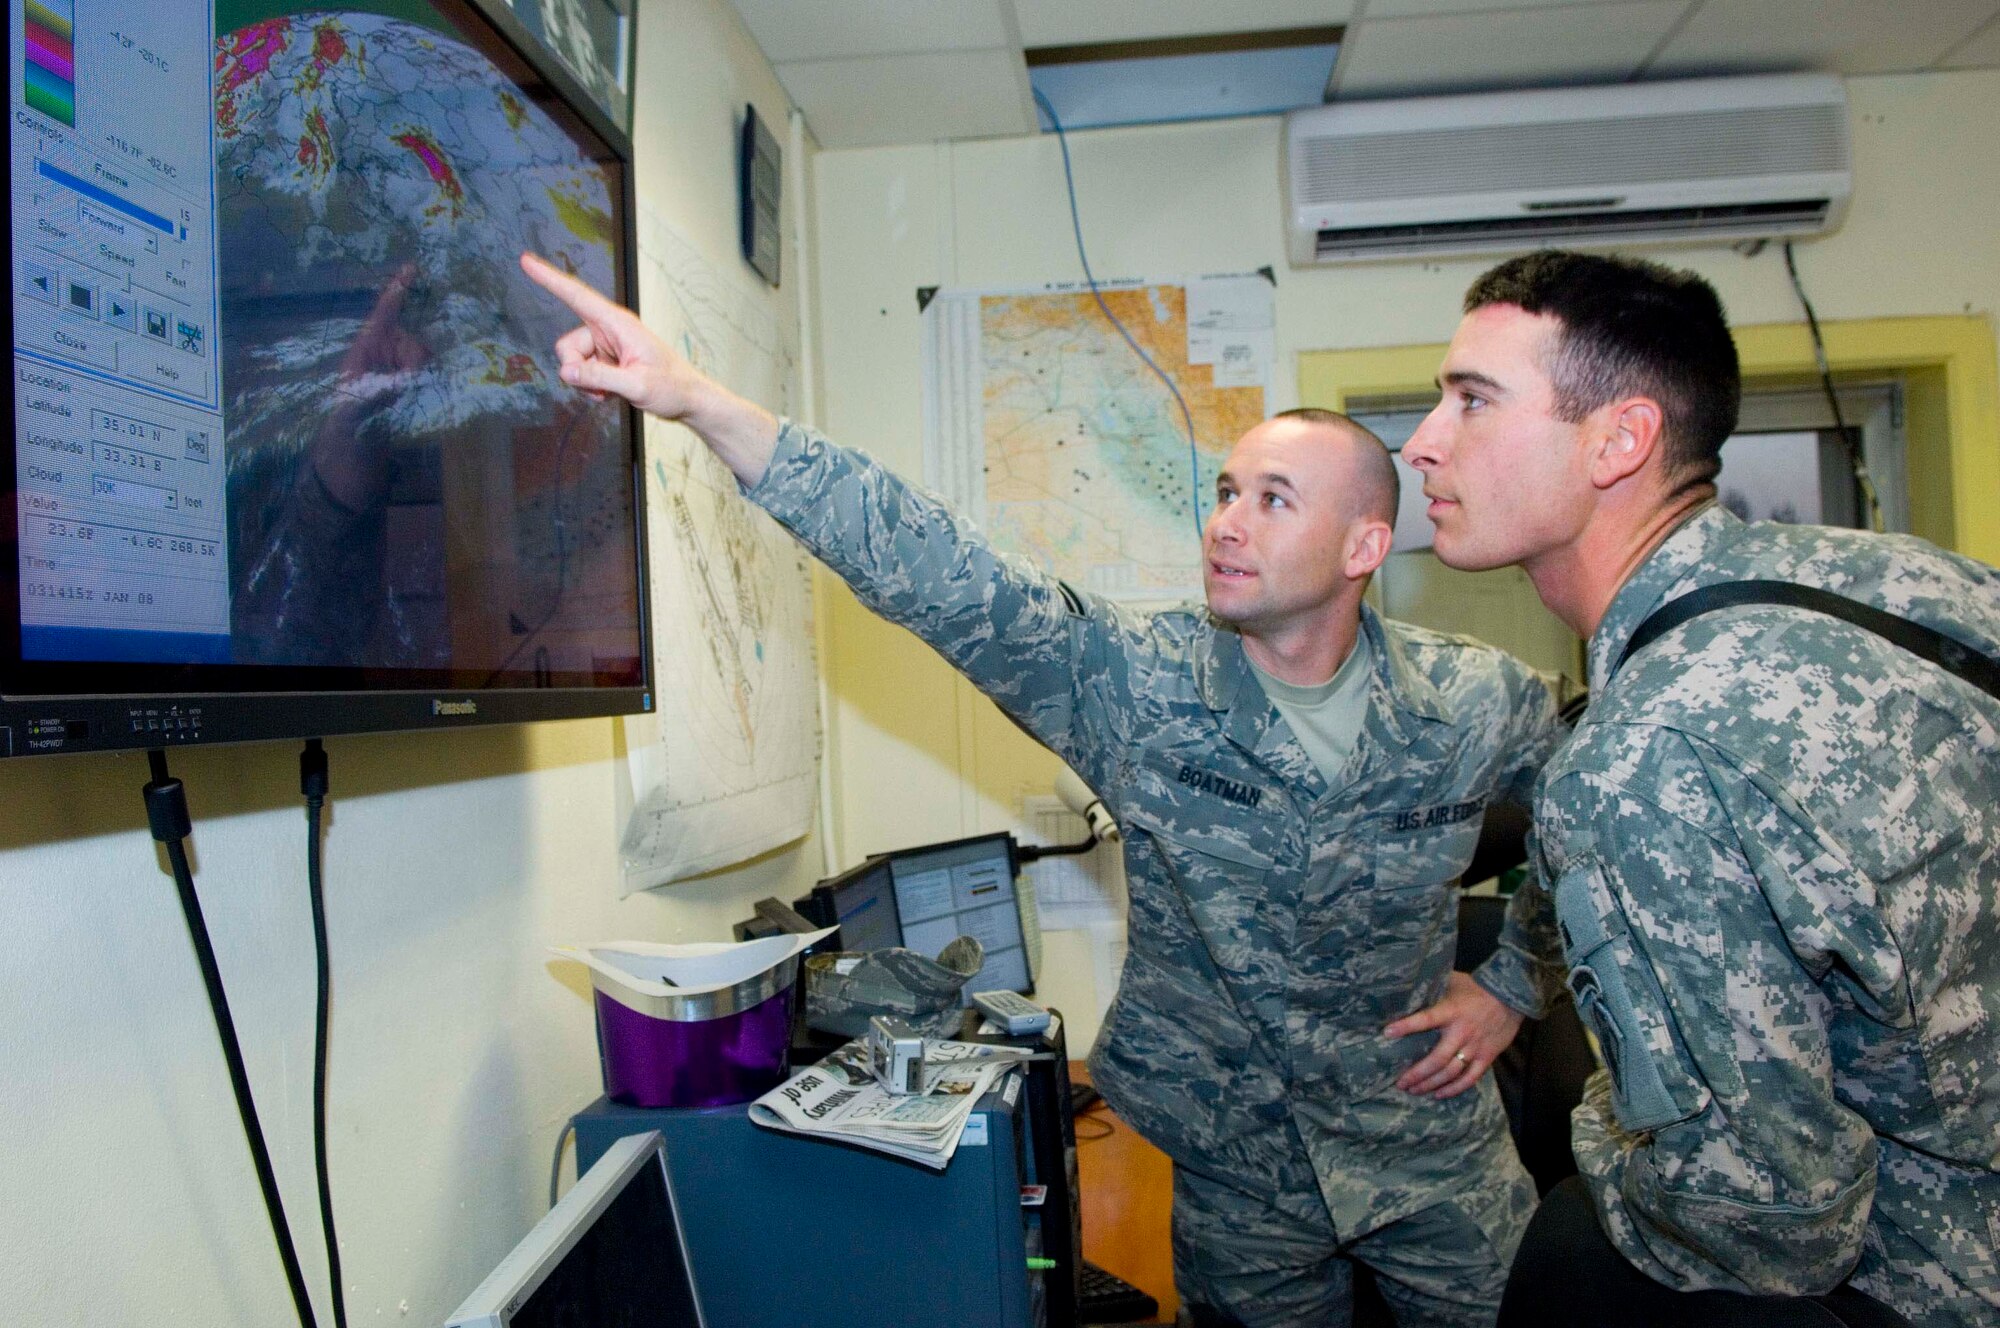 BALAD AIR BASE, Iraq -- Staff Sgt. Brad Boatman, left, a 332nd Expeditionary Operations Support Squadron weather forecaster, points out an area on the weather satellite where there may be possible thunderstorms to his brother, Army Sgt. Matt Boatman. It has been three years since the two have seen each other. Sergeant Brad Boatman is deployed from Fairchild Air Force Base, Wash., and his younger brother is deployed from Fort Campbell, Ky. The brothers are both from Amarillo, Texas. (U.S. Air Force photo/Staff Sgt. Travis Edwards)